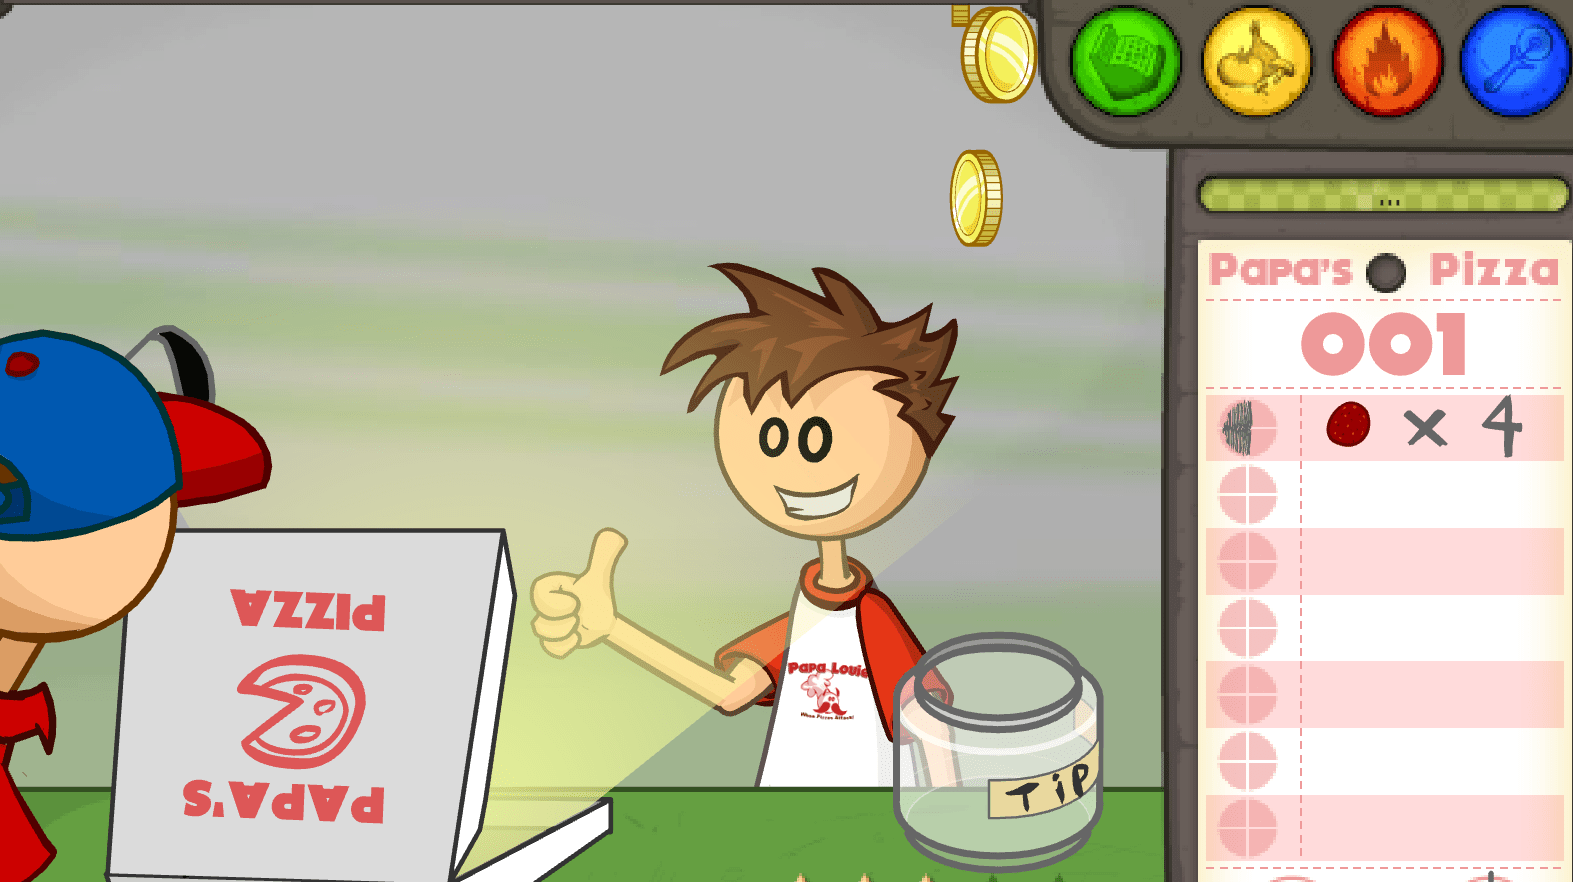 Cooking Games | Play Online at Coolmath Games